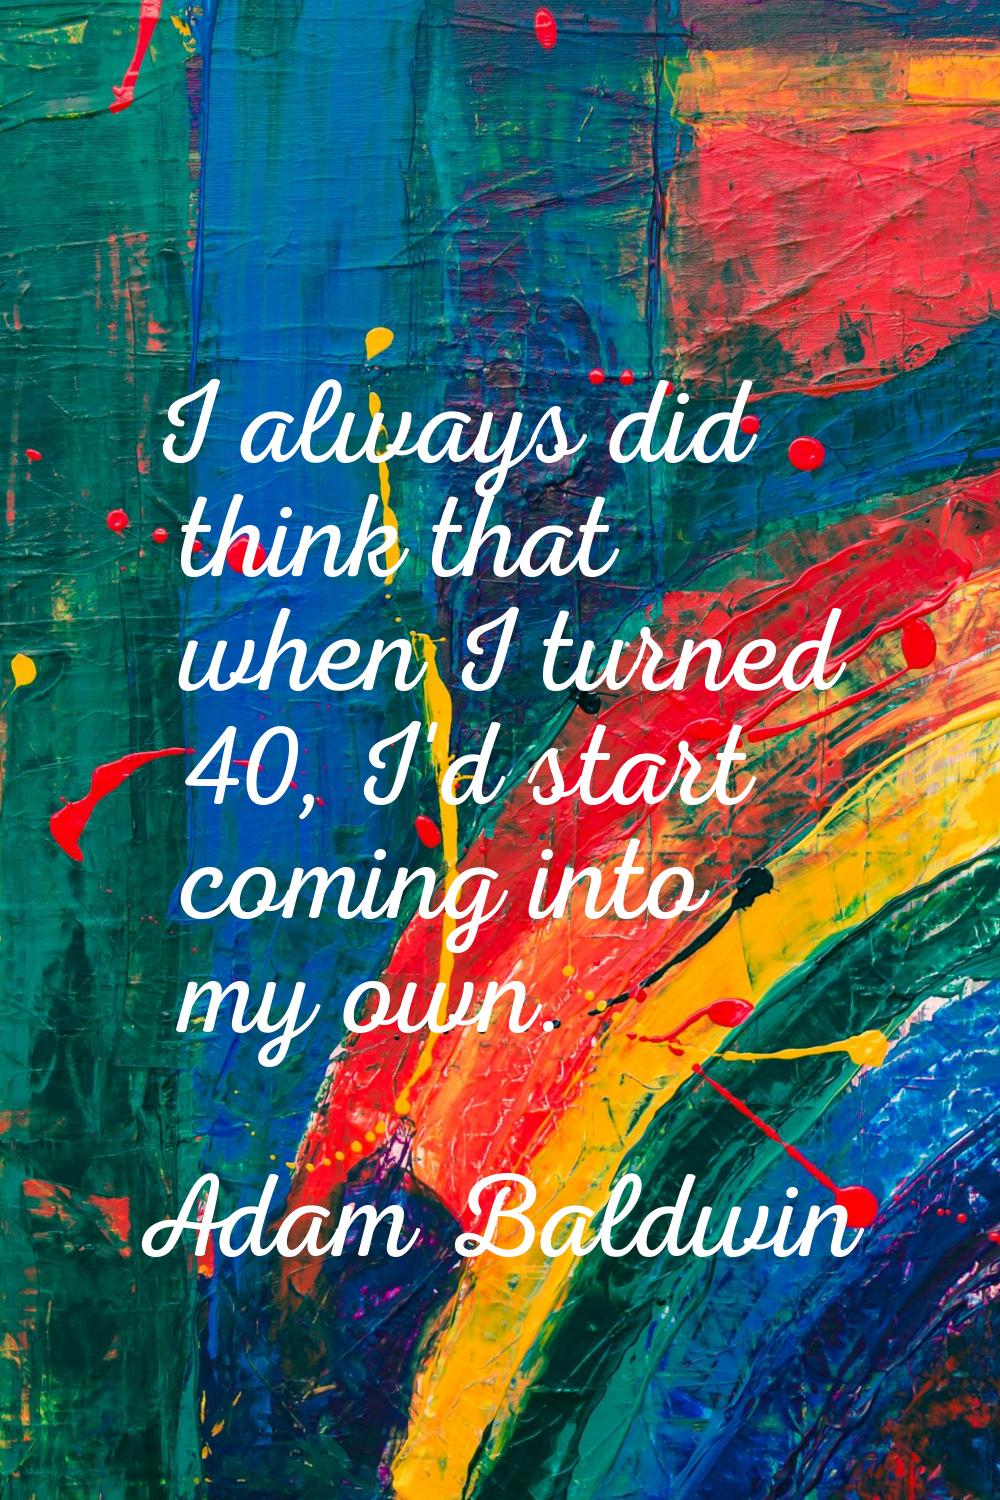 I always did think that when I turned 40, I'd start coming into my own.